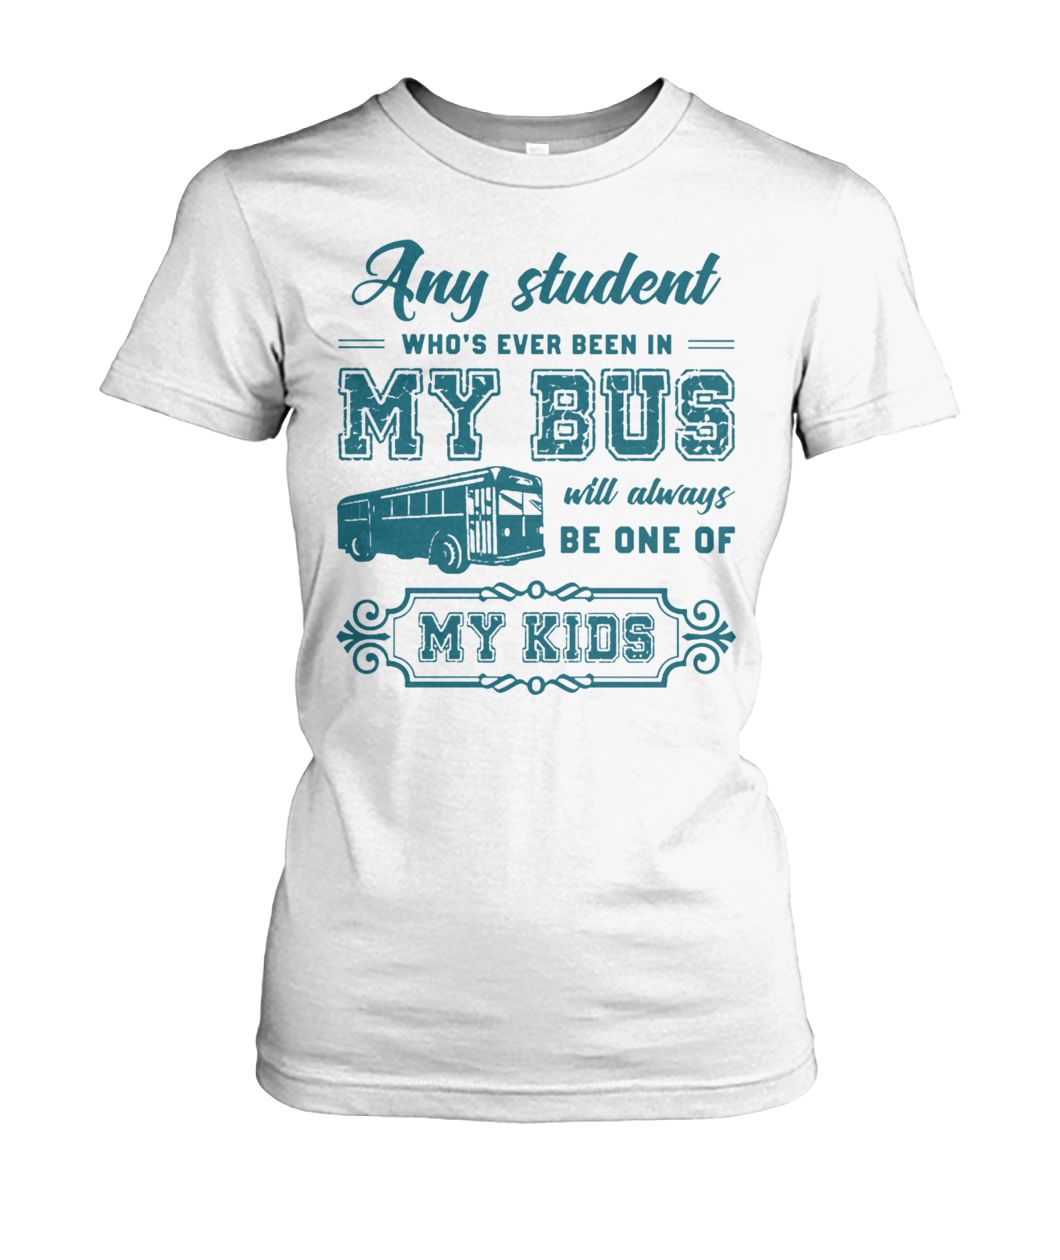 Any student who's ever been in my bus will always be one of my kids women's crew tee